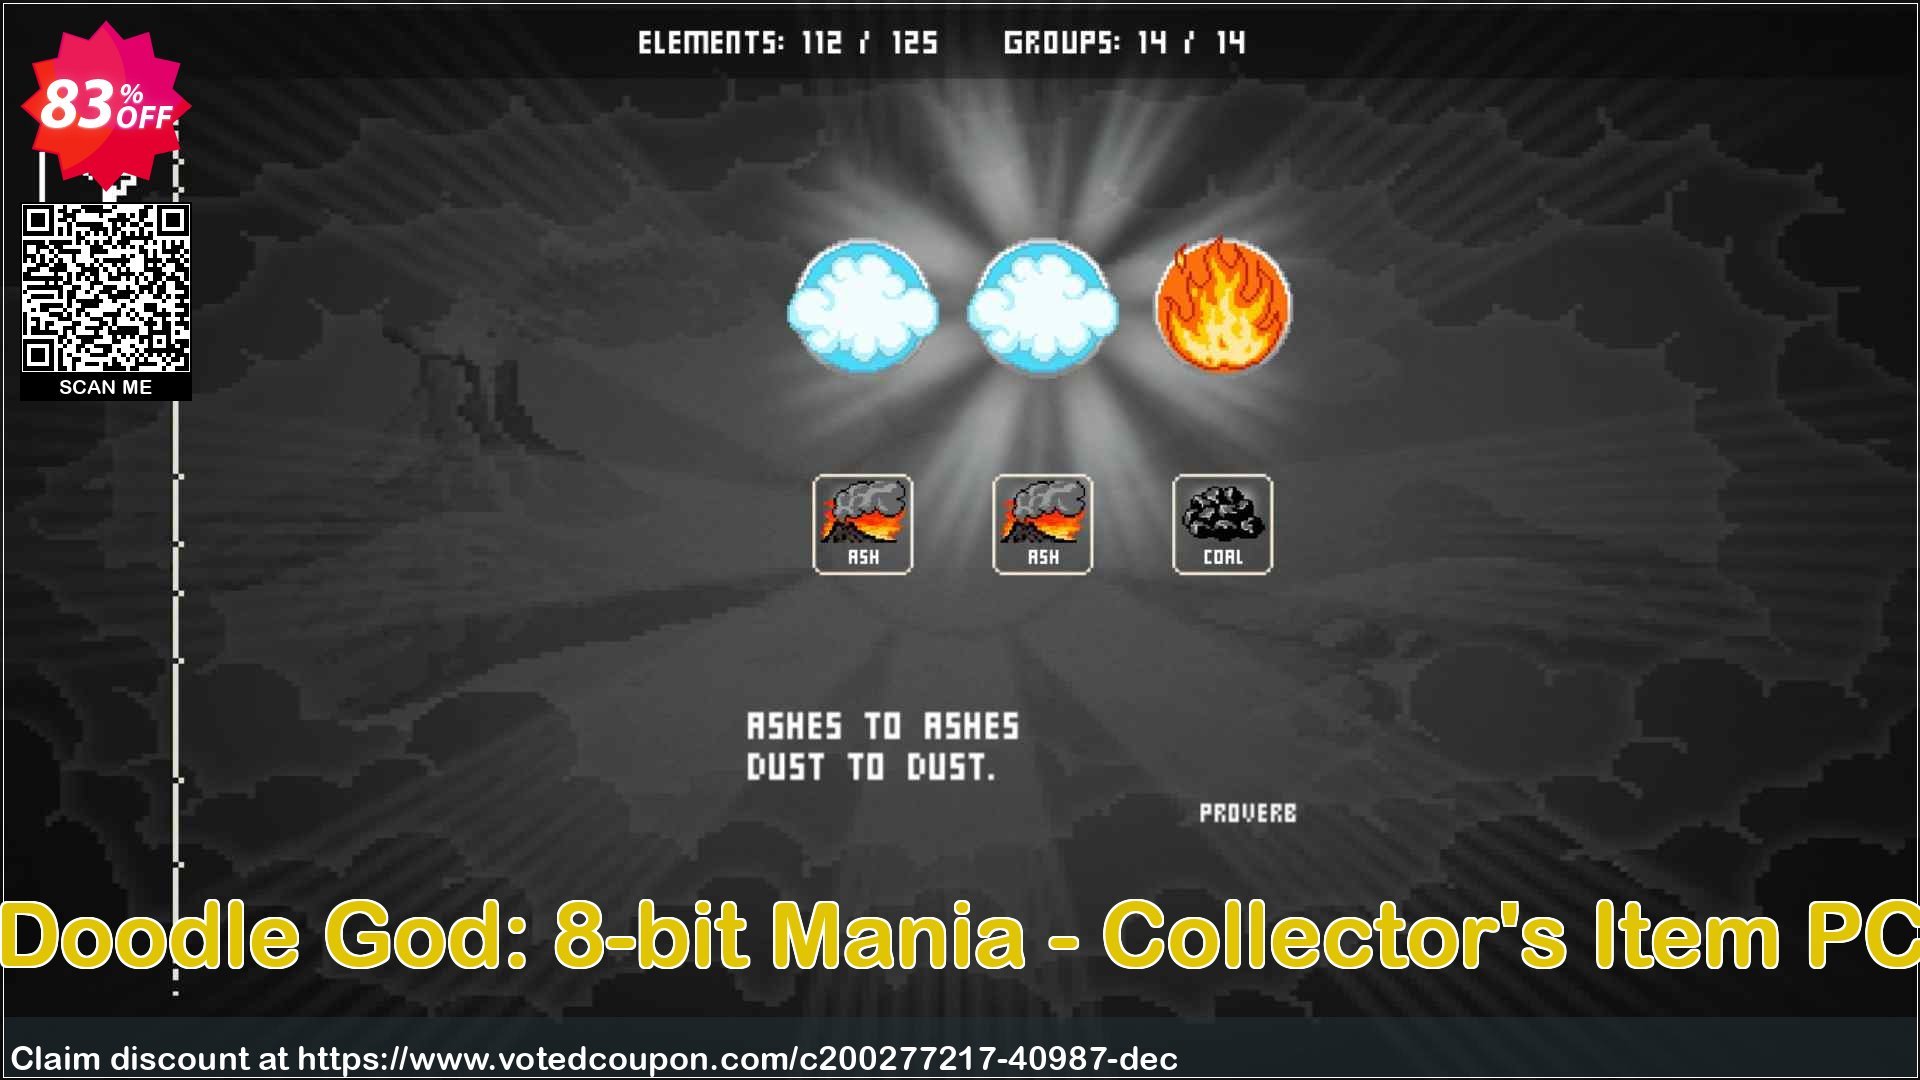 Doodle God: 8-bit Mania - Collector's Item PC Coupon Code May 2024, 83% OFF - VotedCoupon